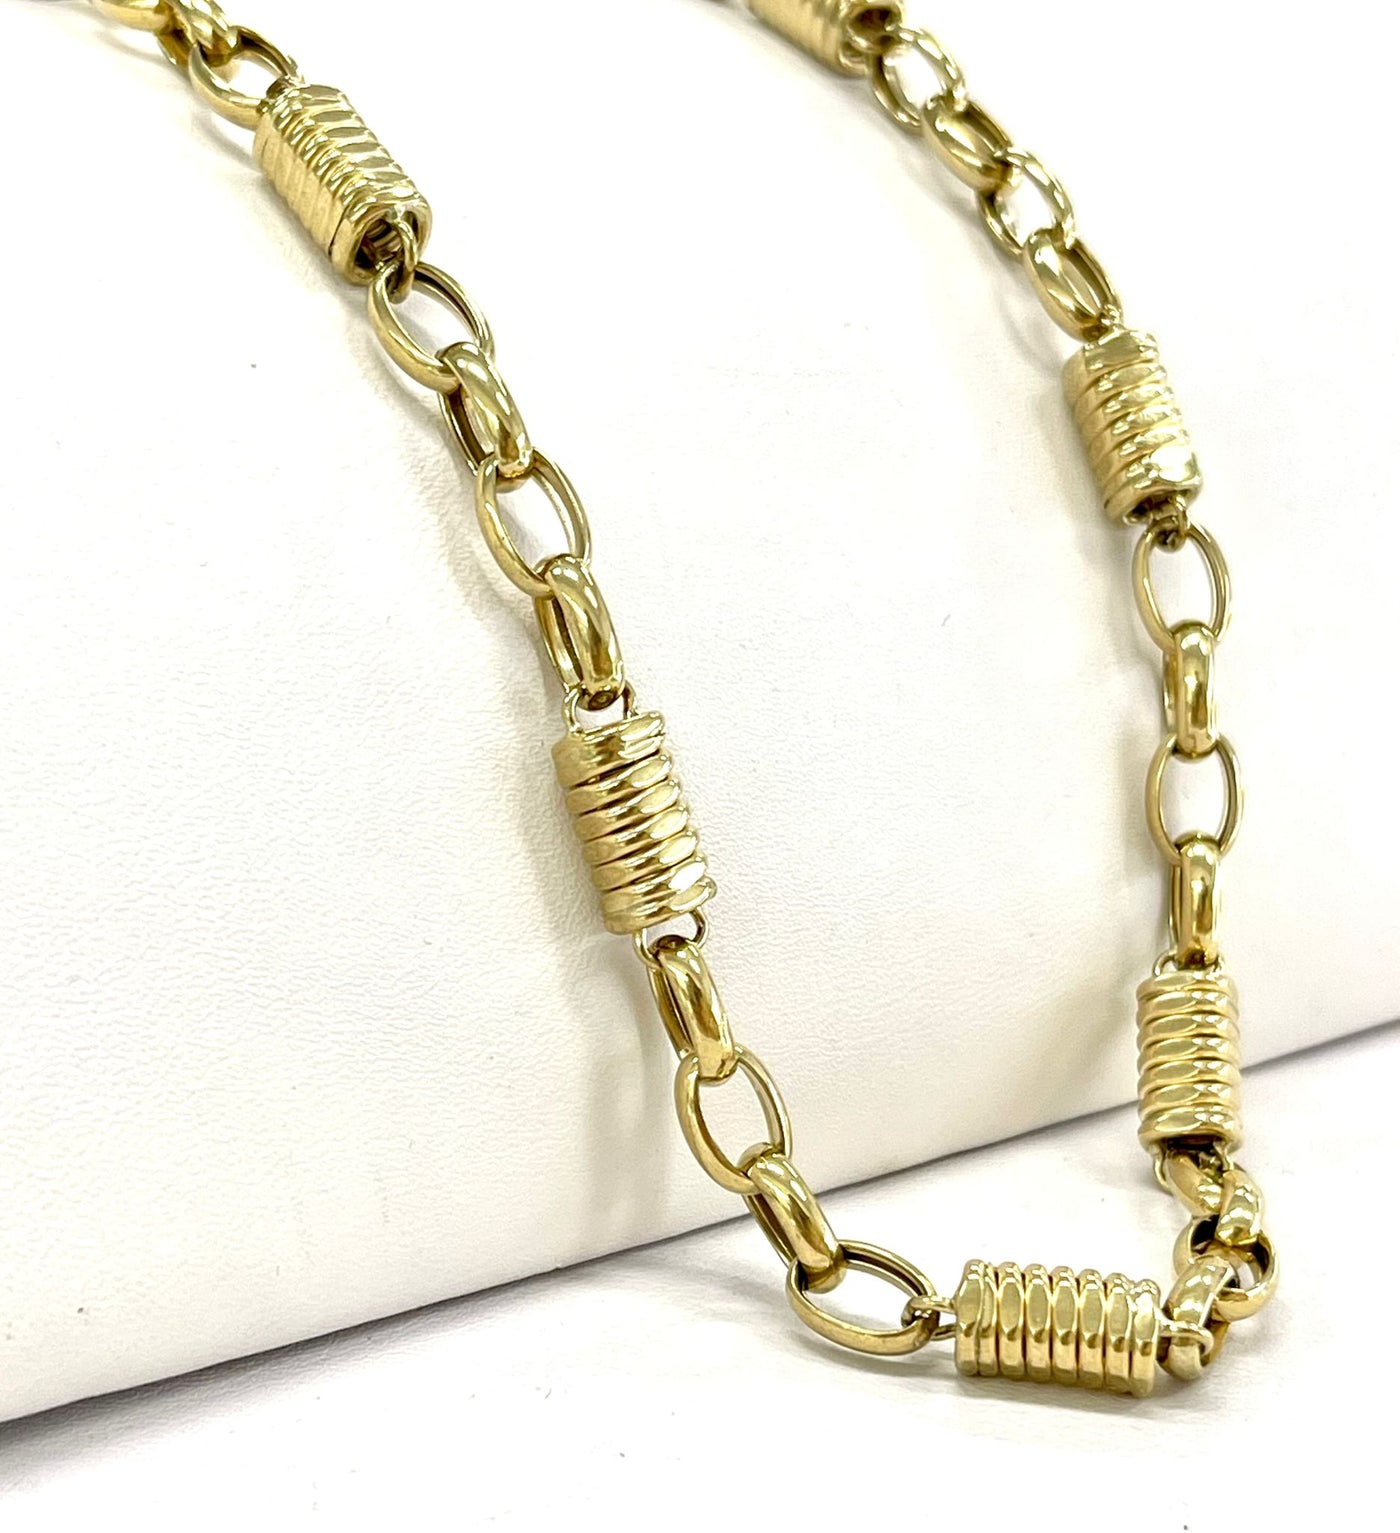 14K Gold Fancy Twist Altenrating Patterned Bullet Chain Necklace